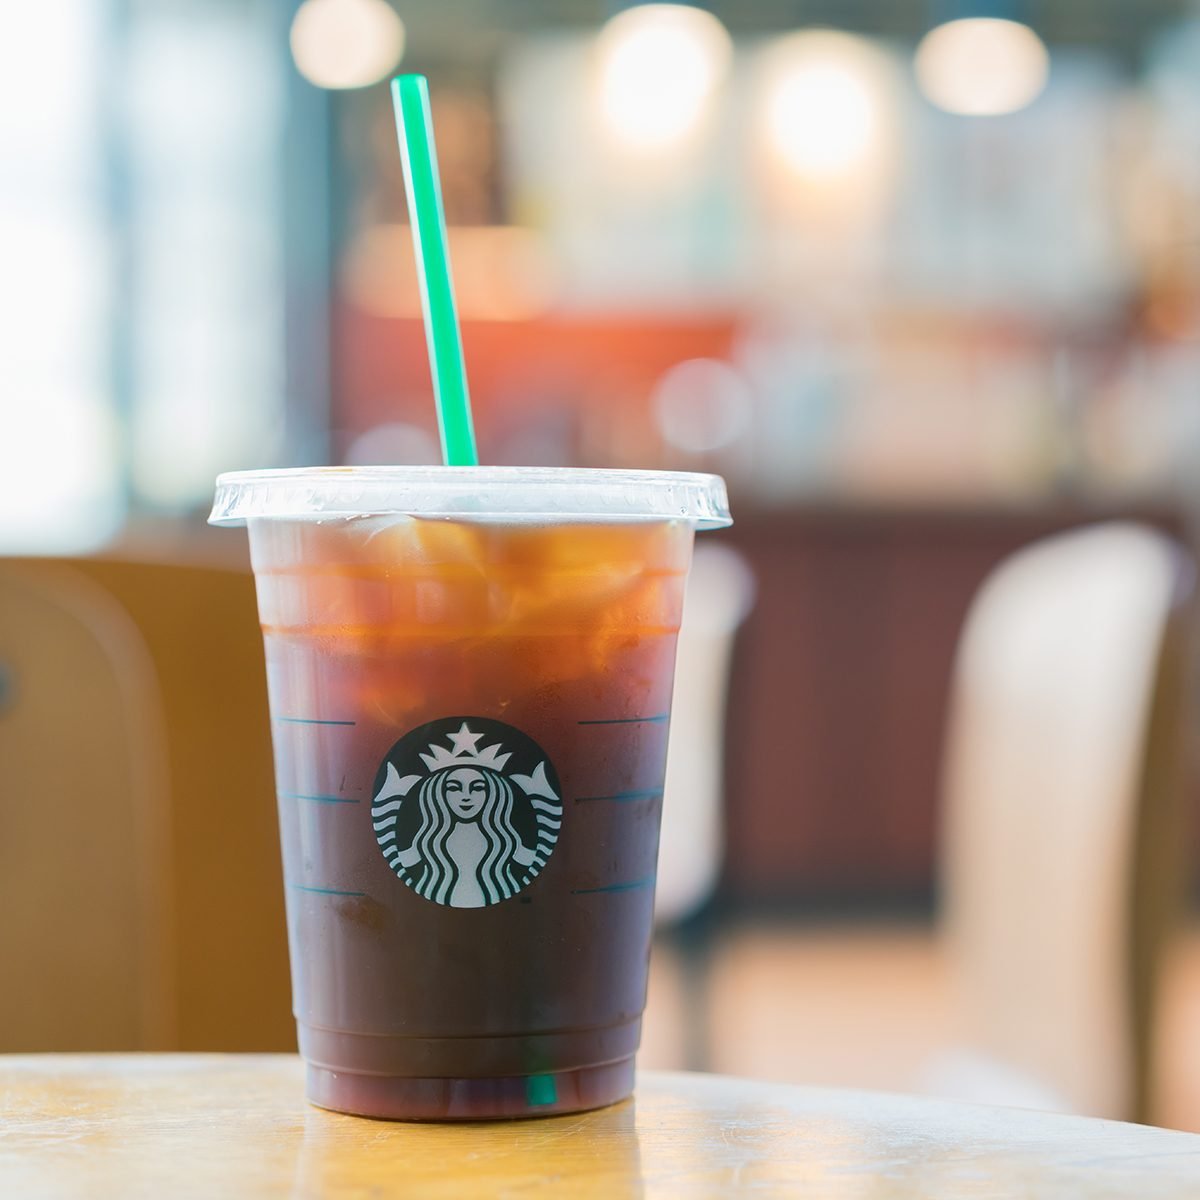 Find Out if Iced Coffee Is Good for You